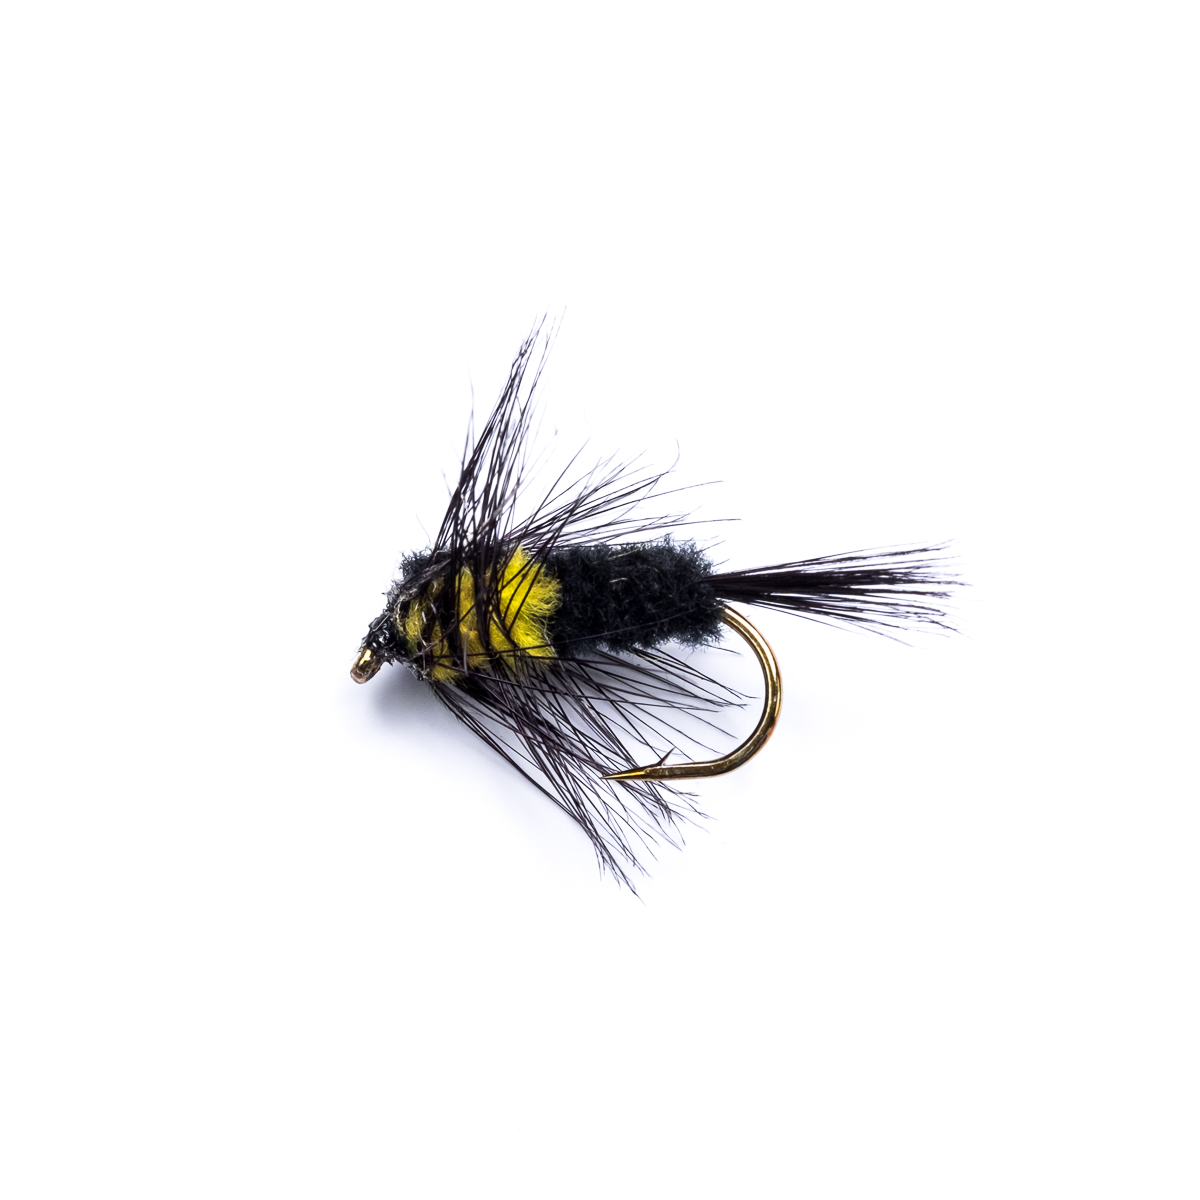 18 Montana Stonefly Nymphs Long Shank Trout Fly Fishing Flies by Dragonflies